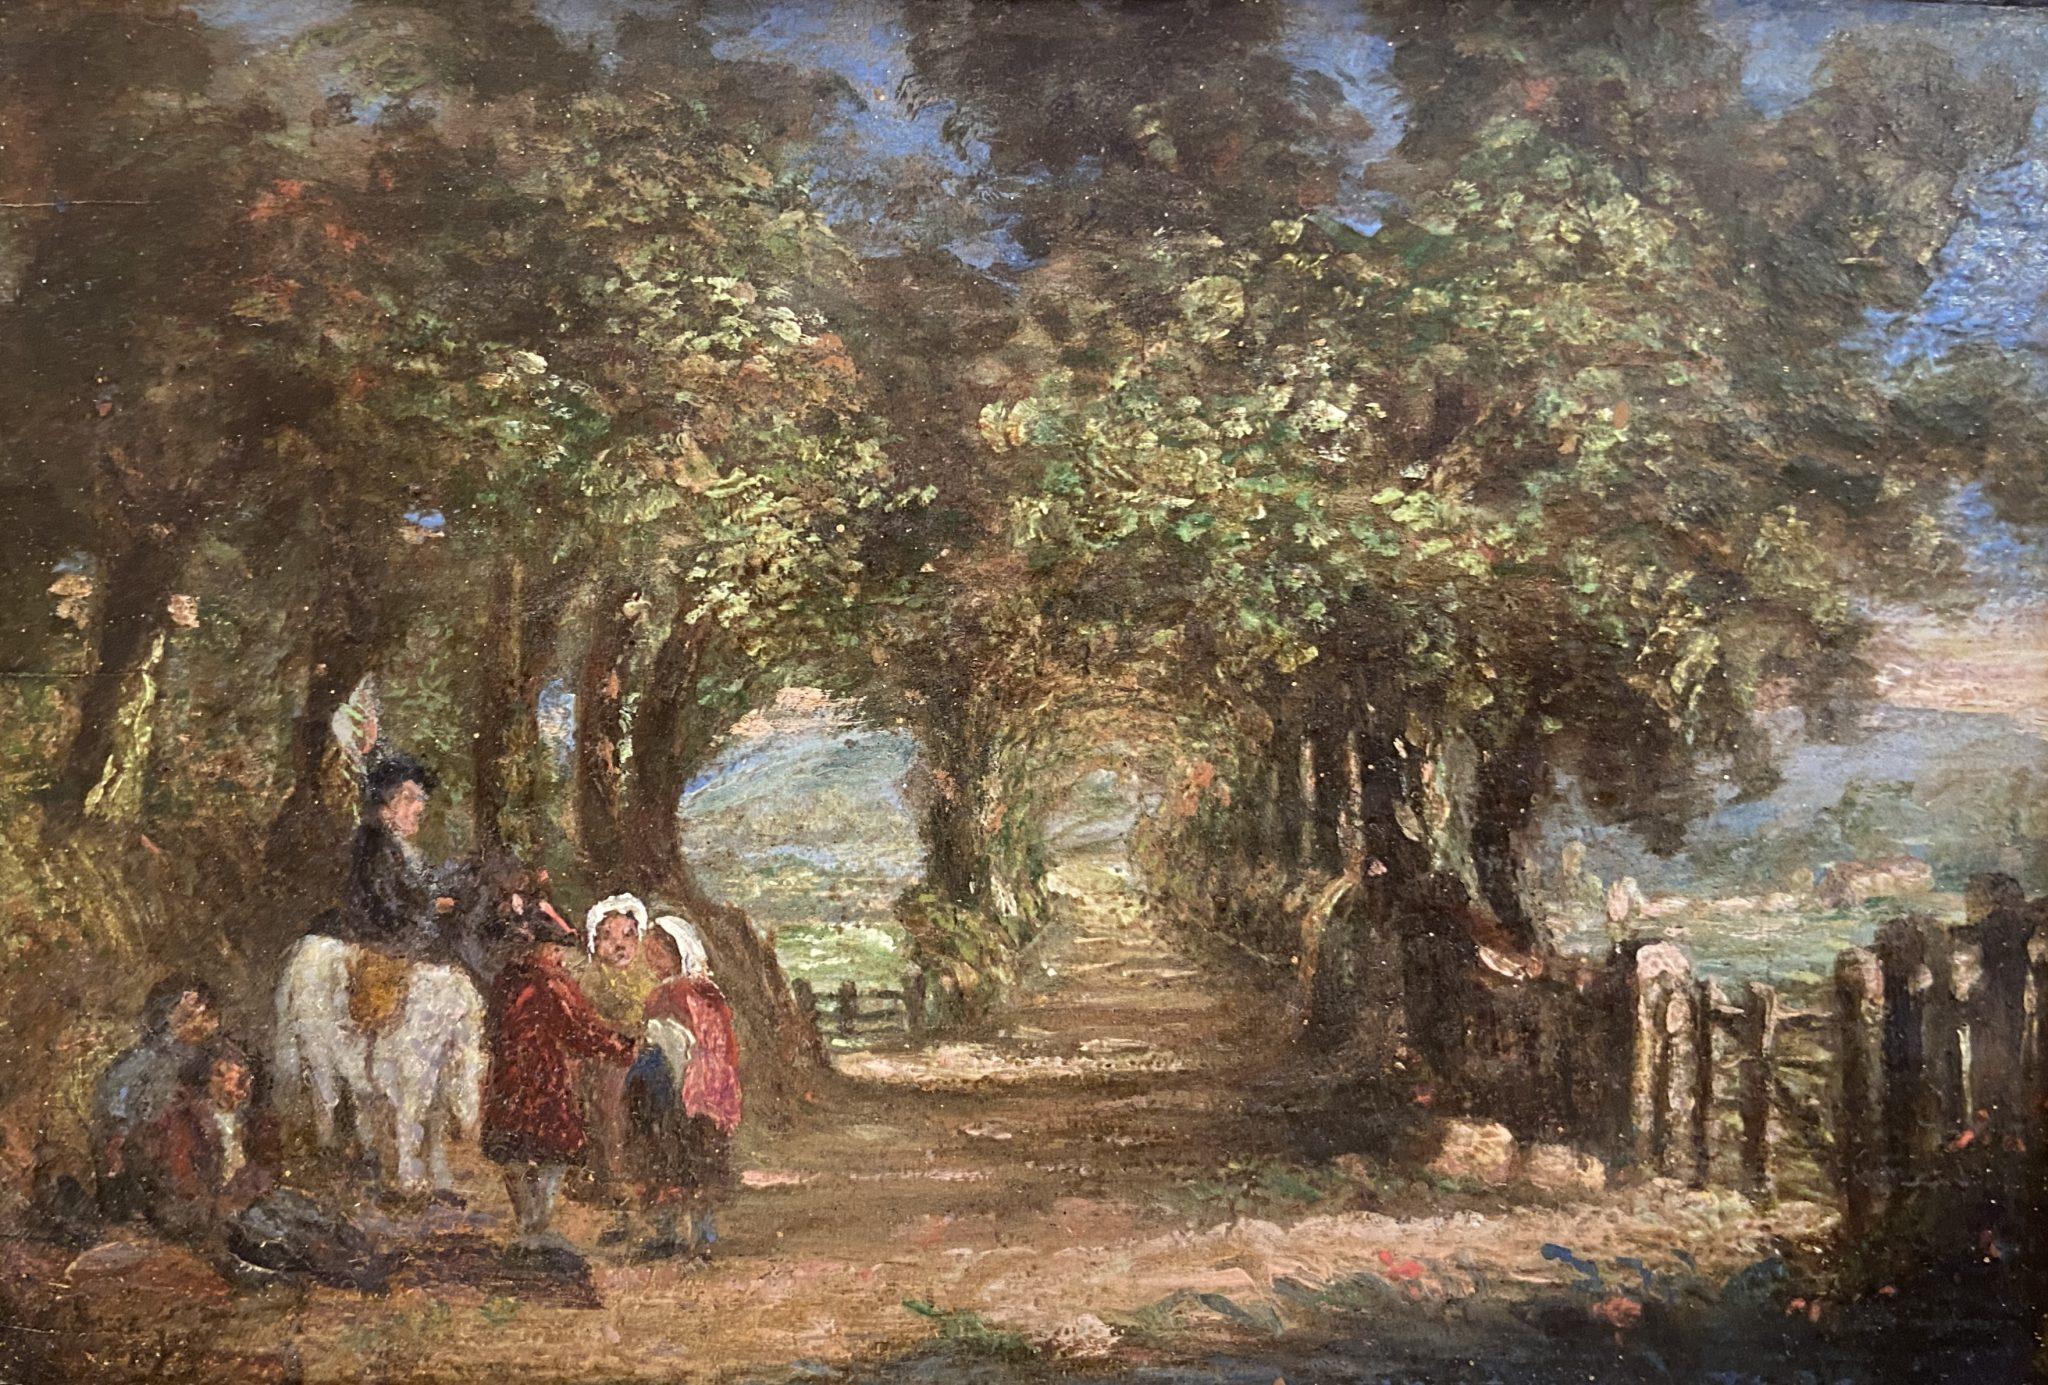 18th Century English School Landscape Painting - The Journey, Late 18th English Oil Landscape